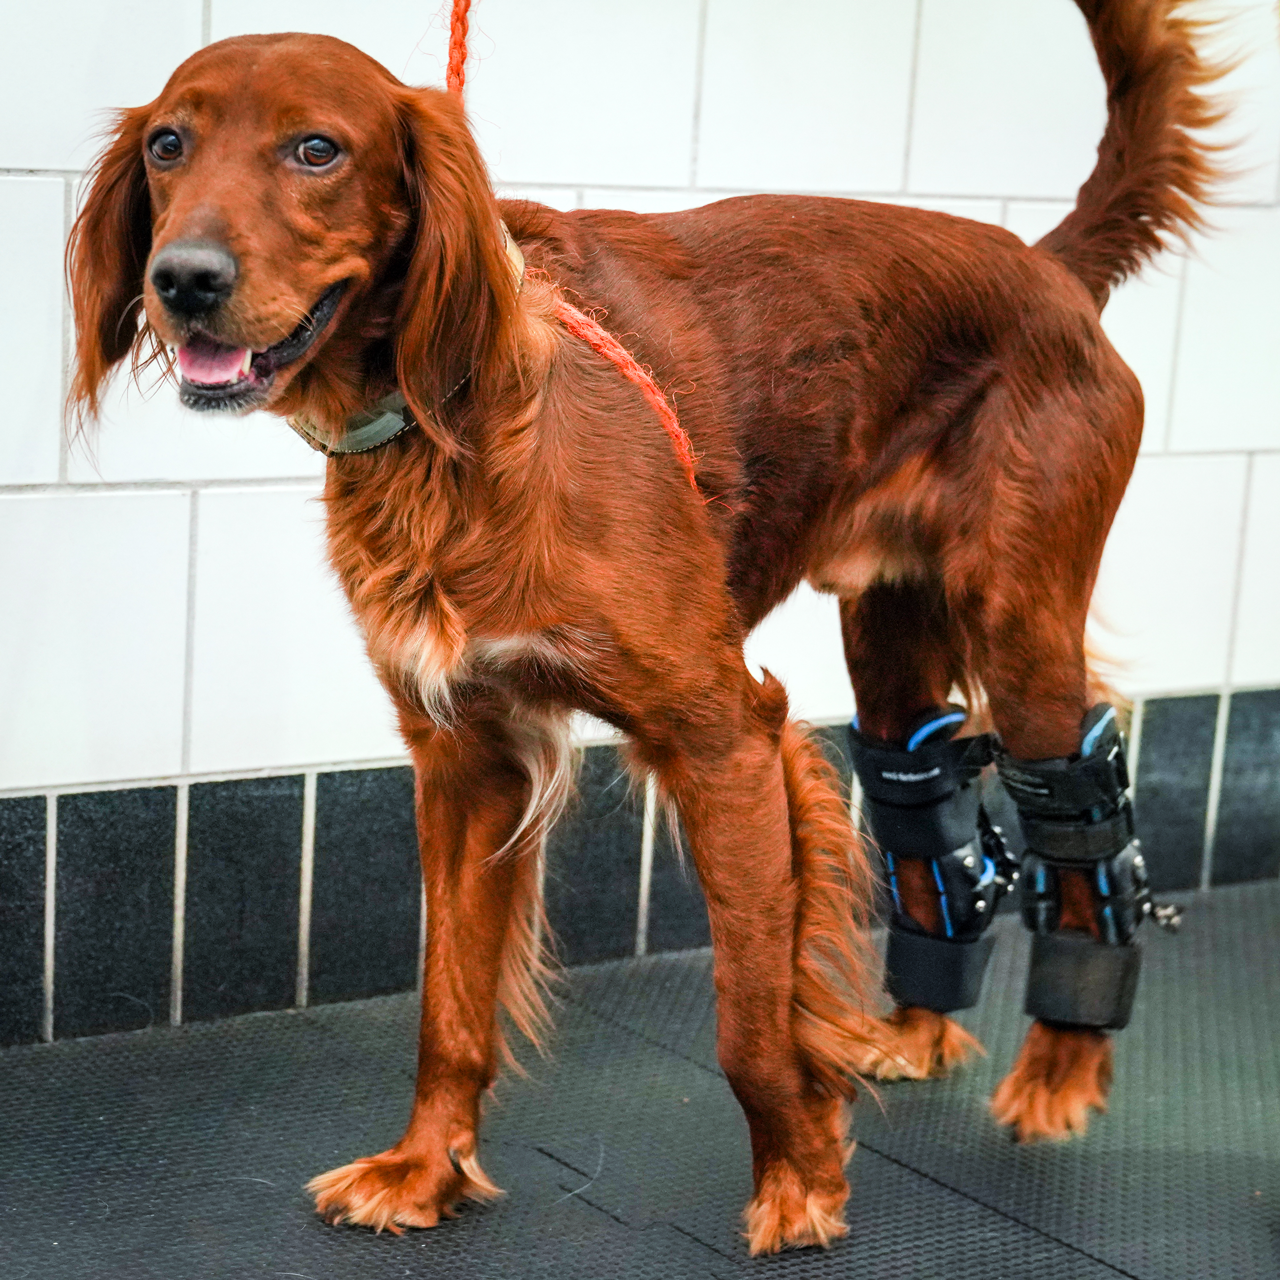 A brown dog wearing braces on its back legs